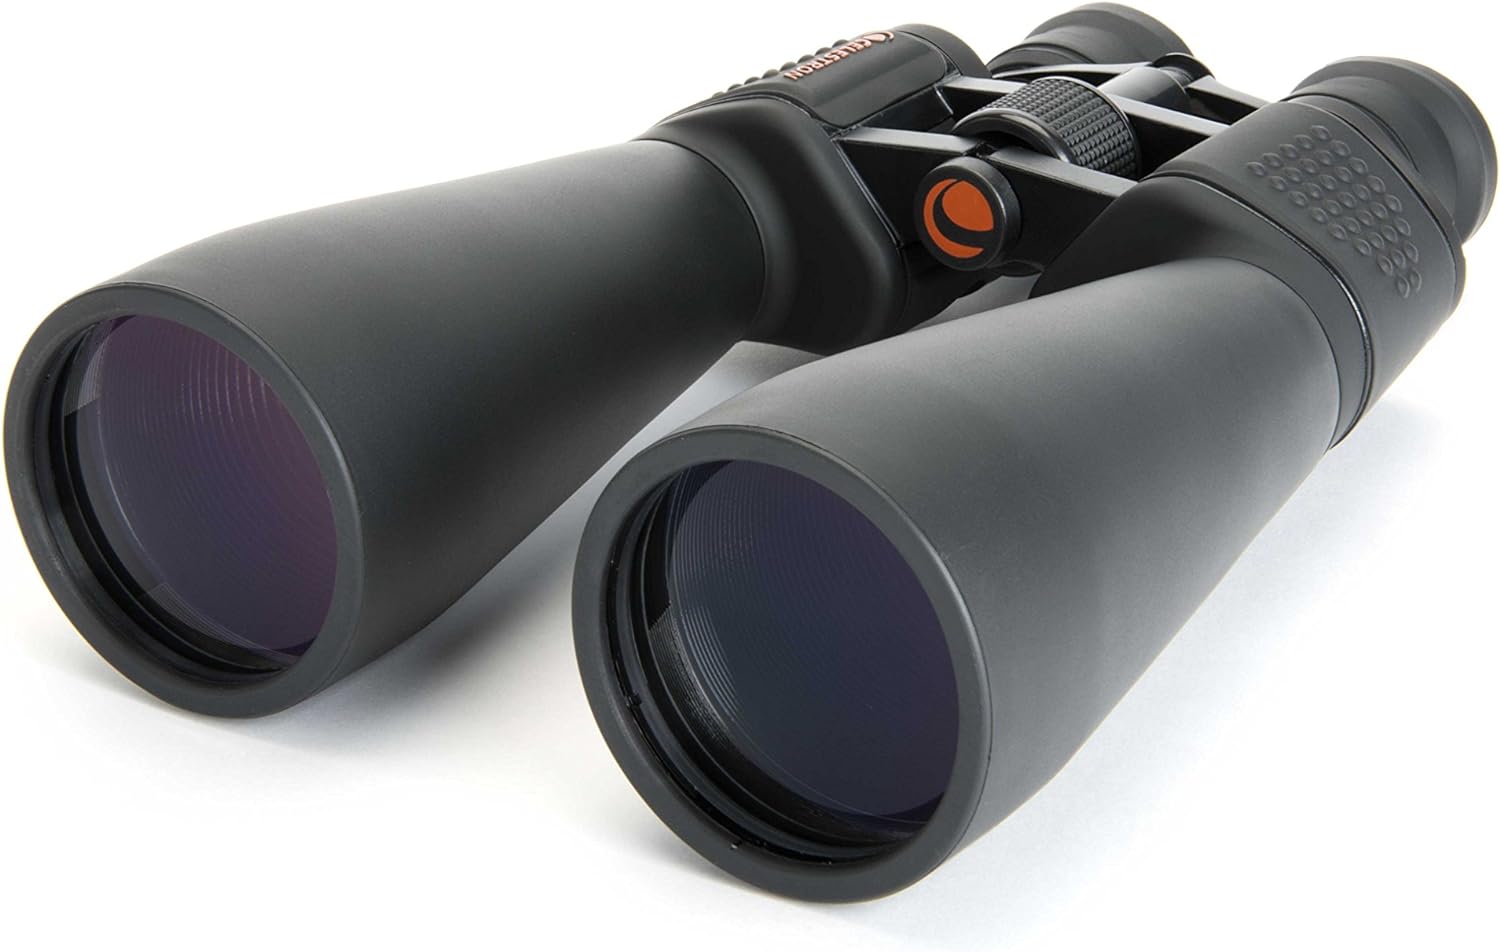 Celestron – SkyMaster 15-35x70 Zoom Binocular – 15 to 35x70mm Zoom Eyepiece – Multi-Coated BaK4 Optics for Outdoor and Astronomy Viewing – Tripod Adaptable – Includes Soft Carrying Case